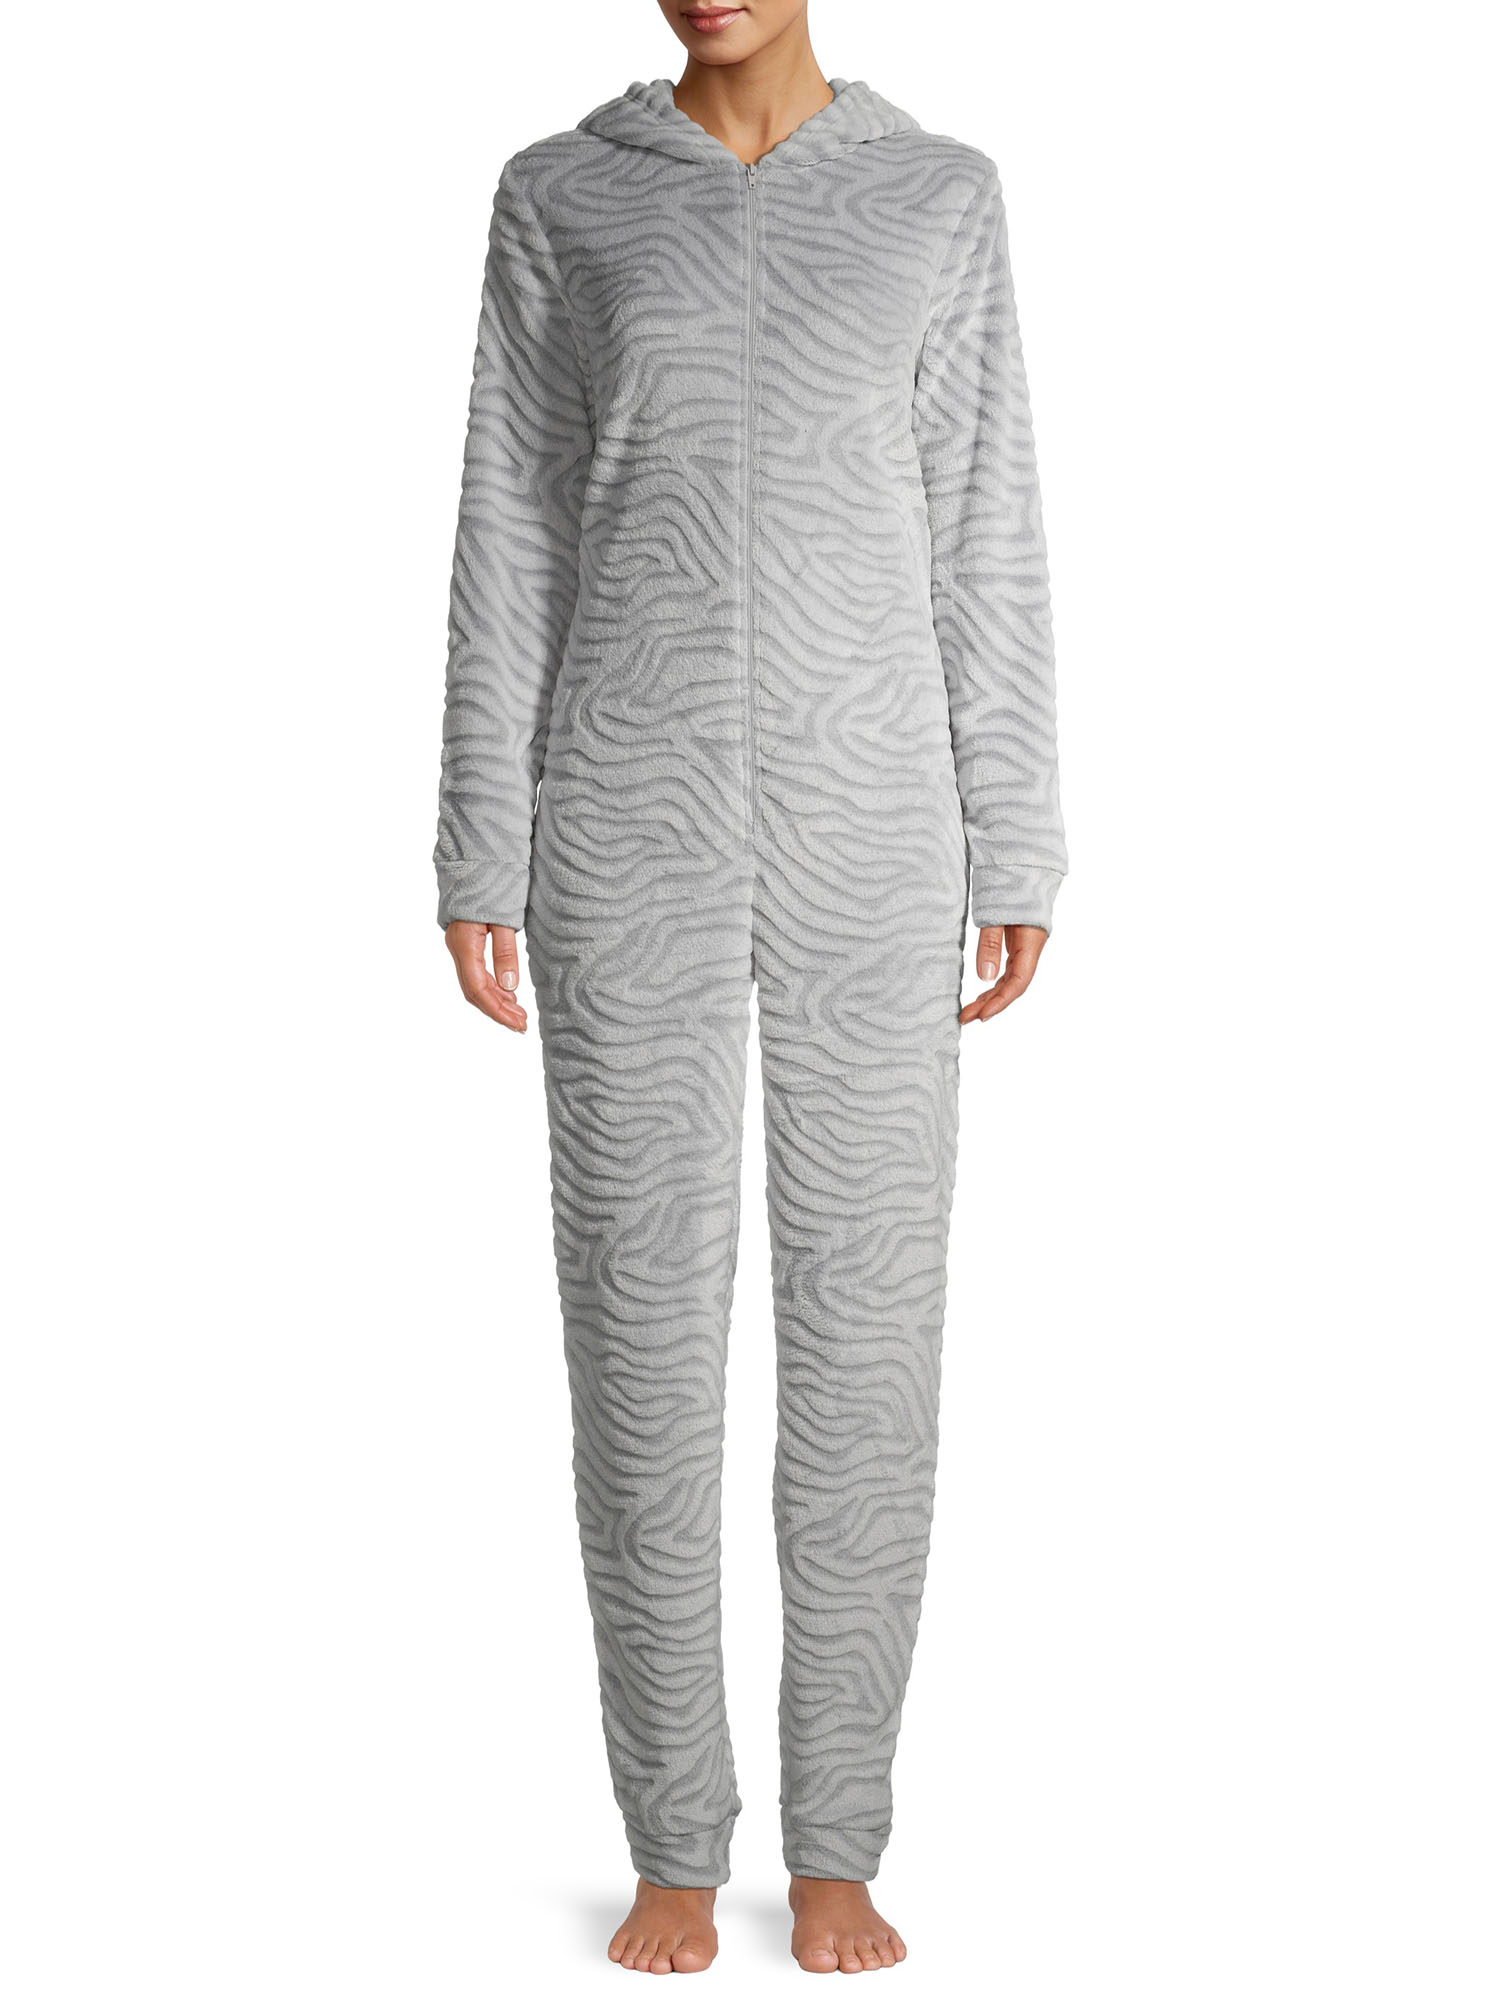 George Women's Character Pajama Union Suit - image 4 of 6